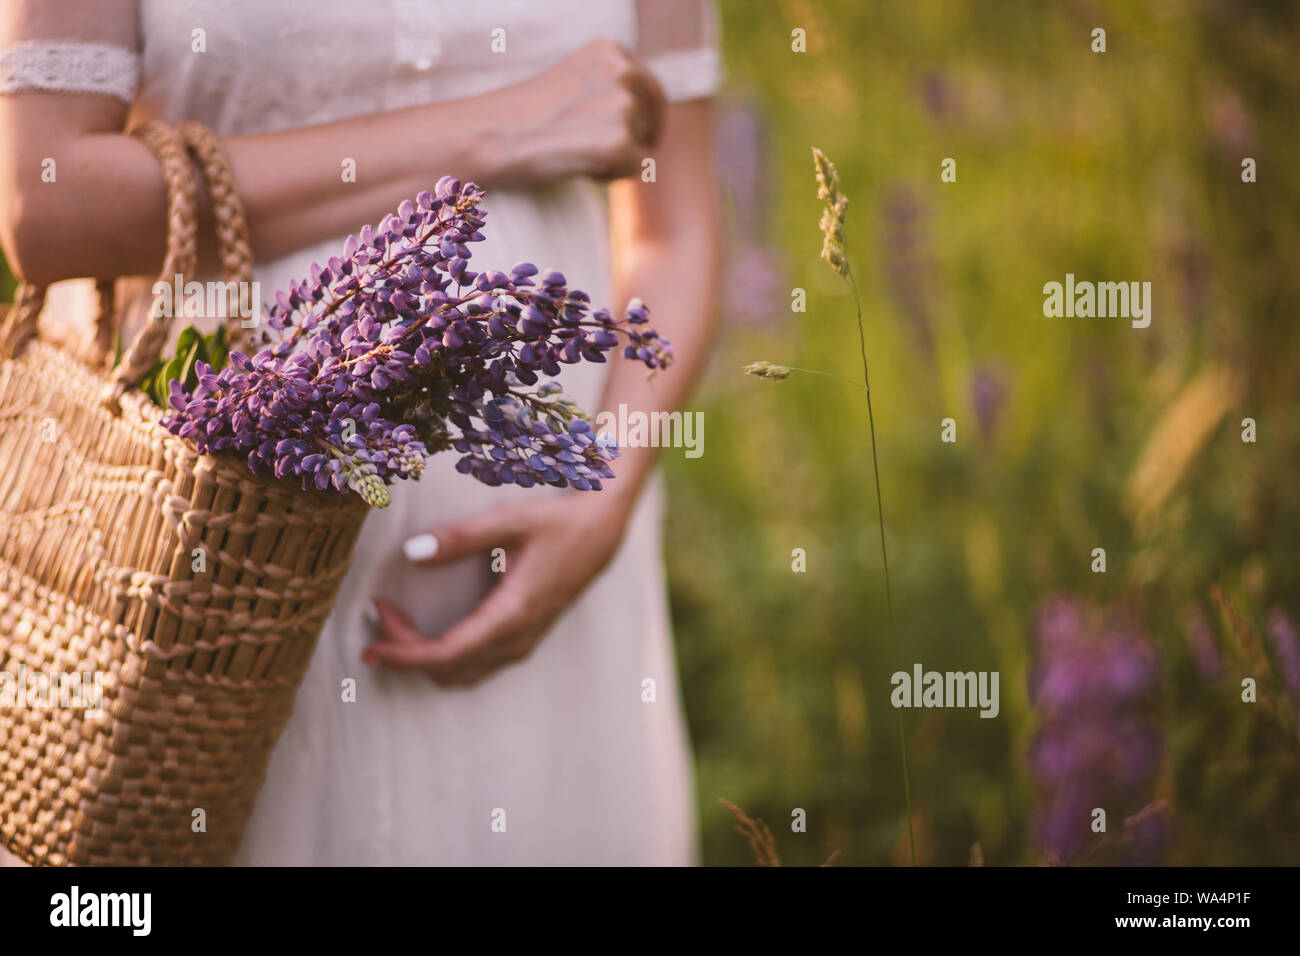 Women hands holding a basket with wildflowers Stock Photo